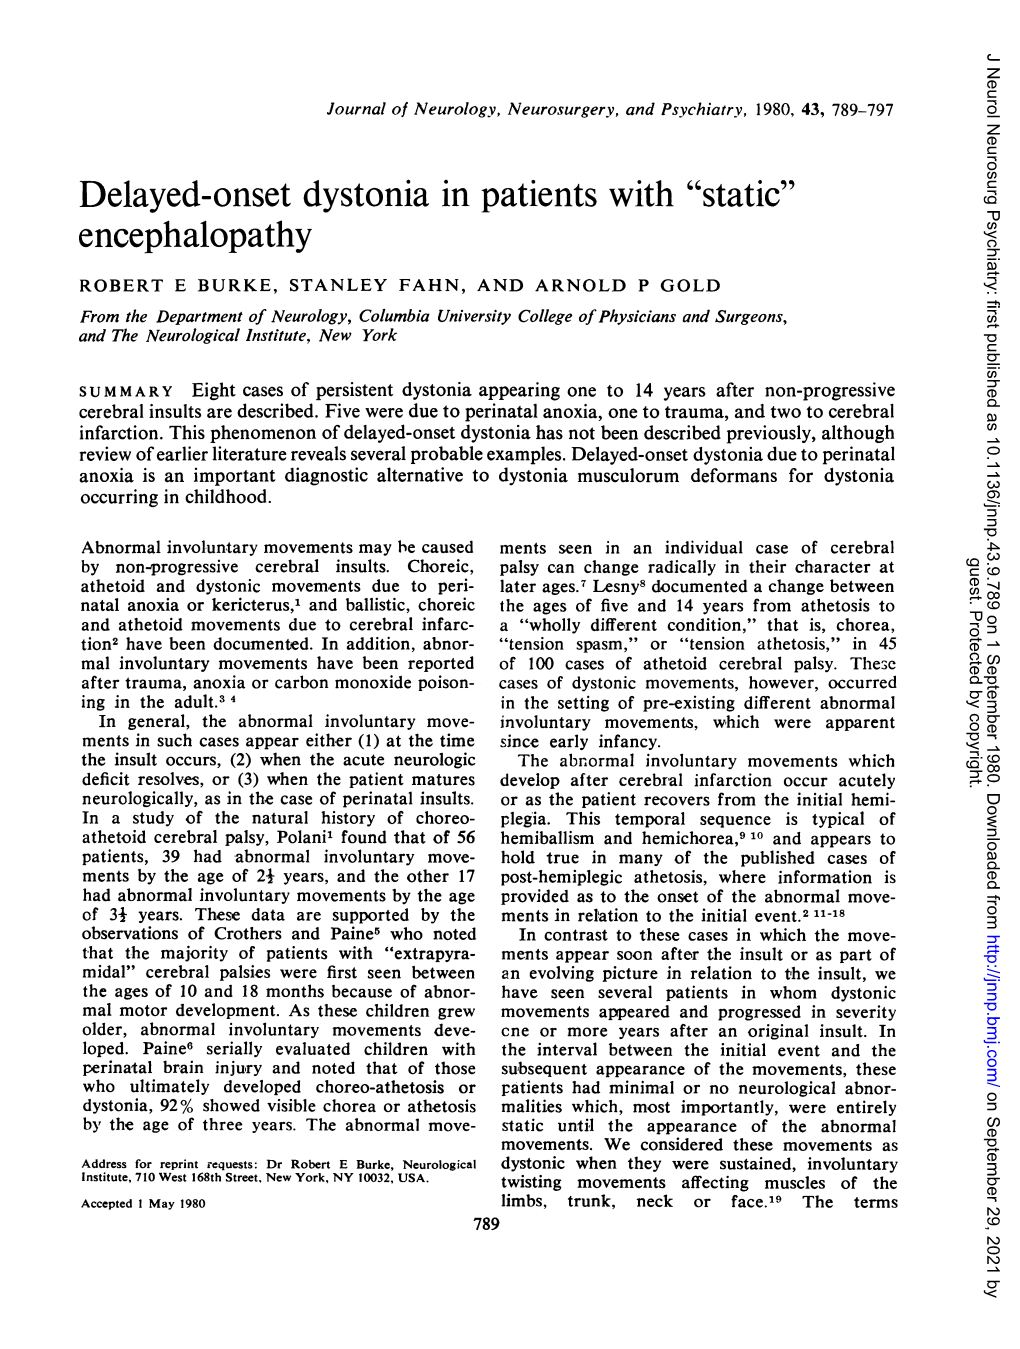 Delayed-Onset Dystonia in Patients with "Static" Encephalopathy